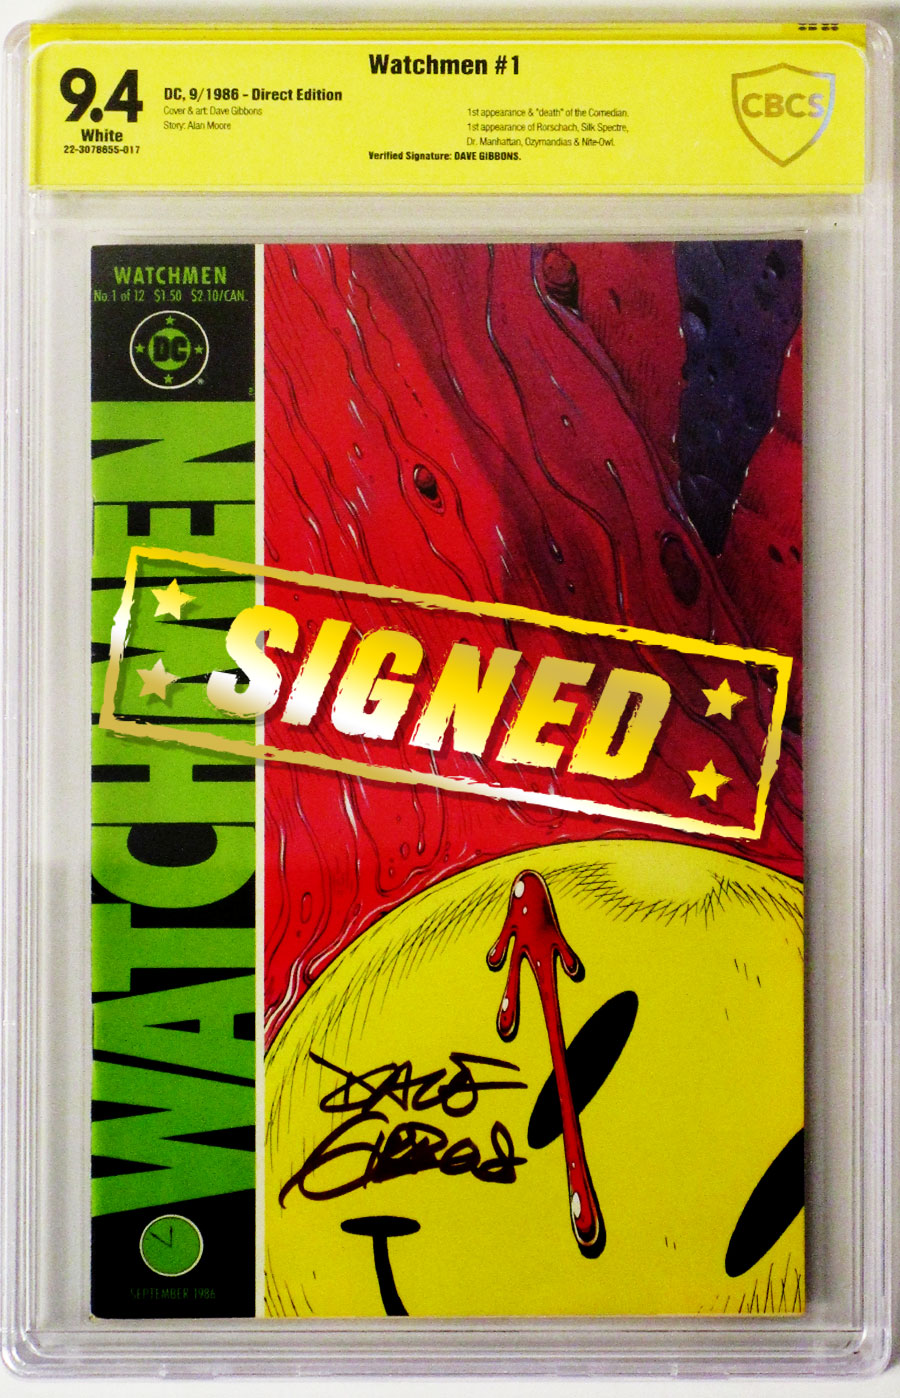 Watchmen #1 Cover D Signed By Dave Gibbons CBCS 9.4